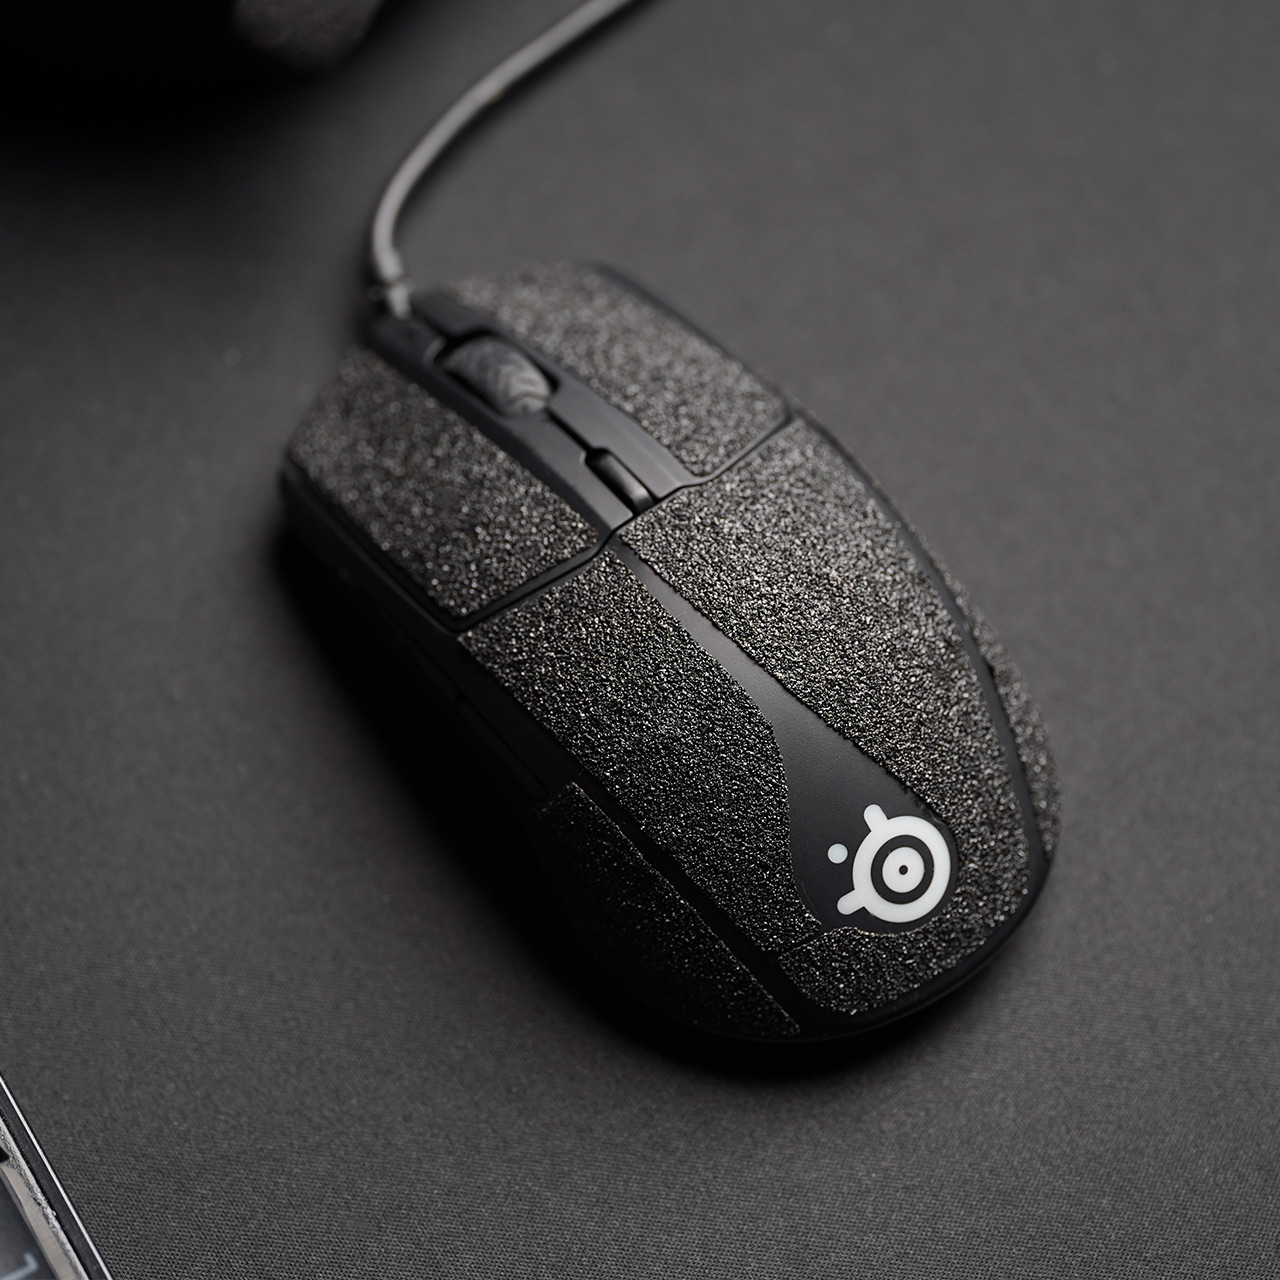 Steelseries Rival 3 Antgrip • Antgrip - Upgrade your gaming mouse.